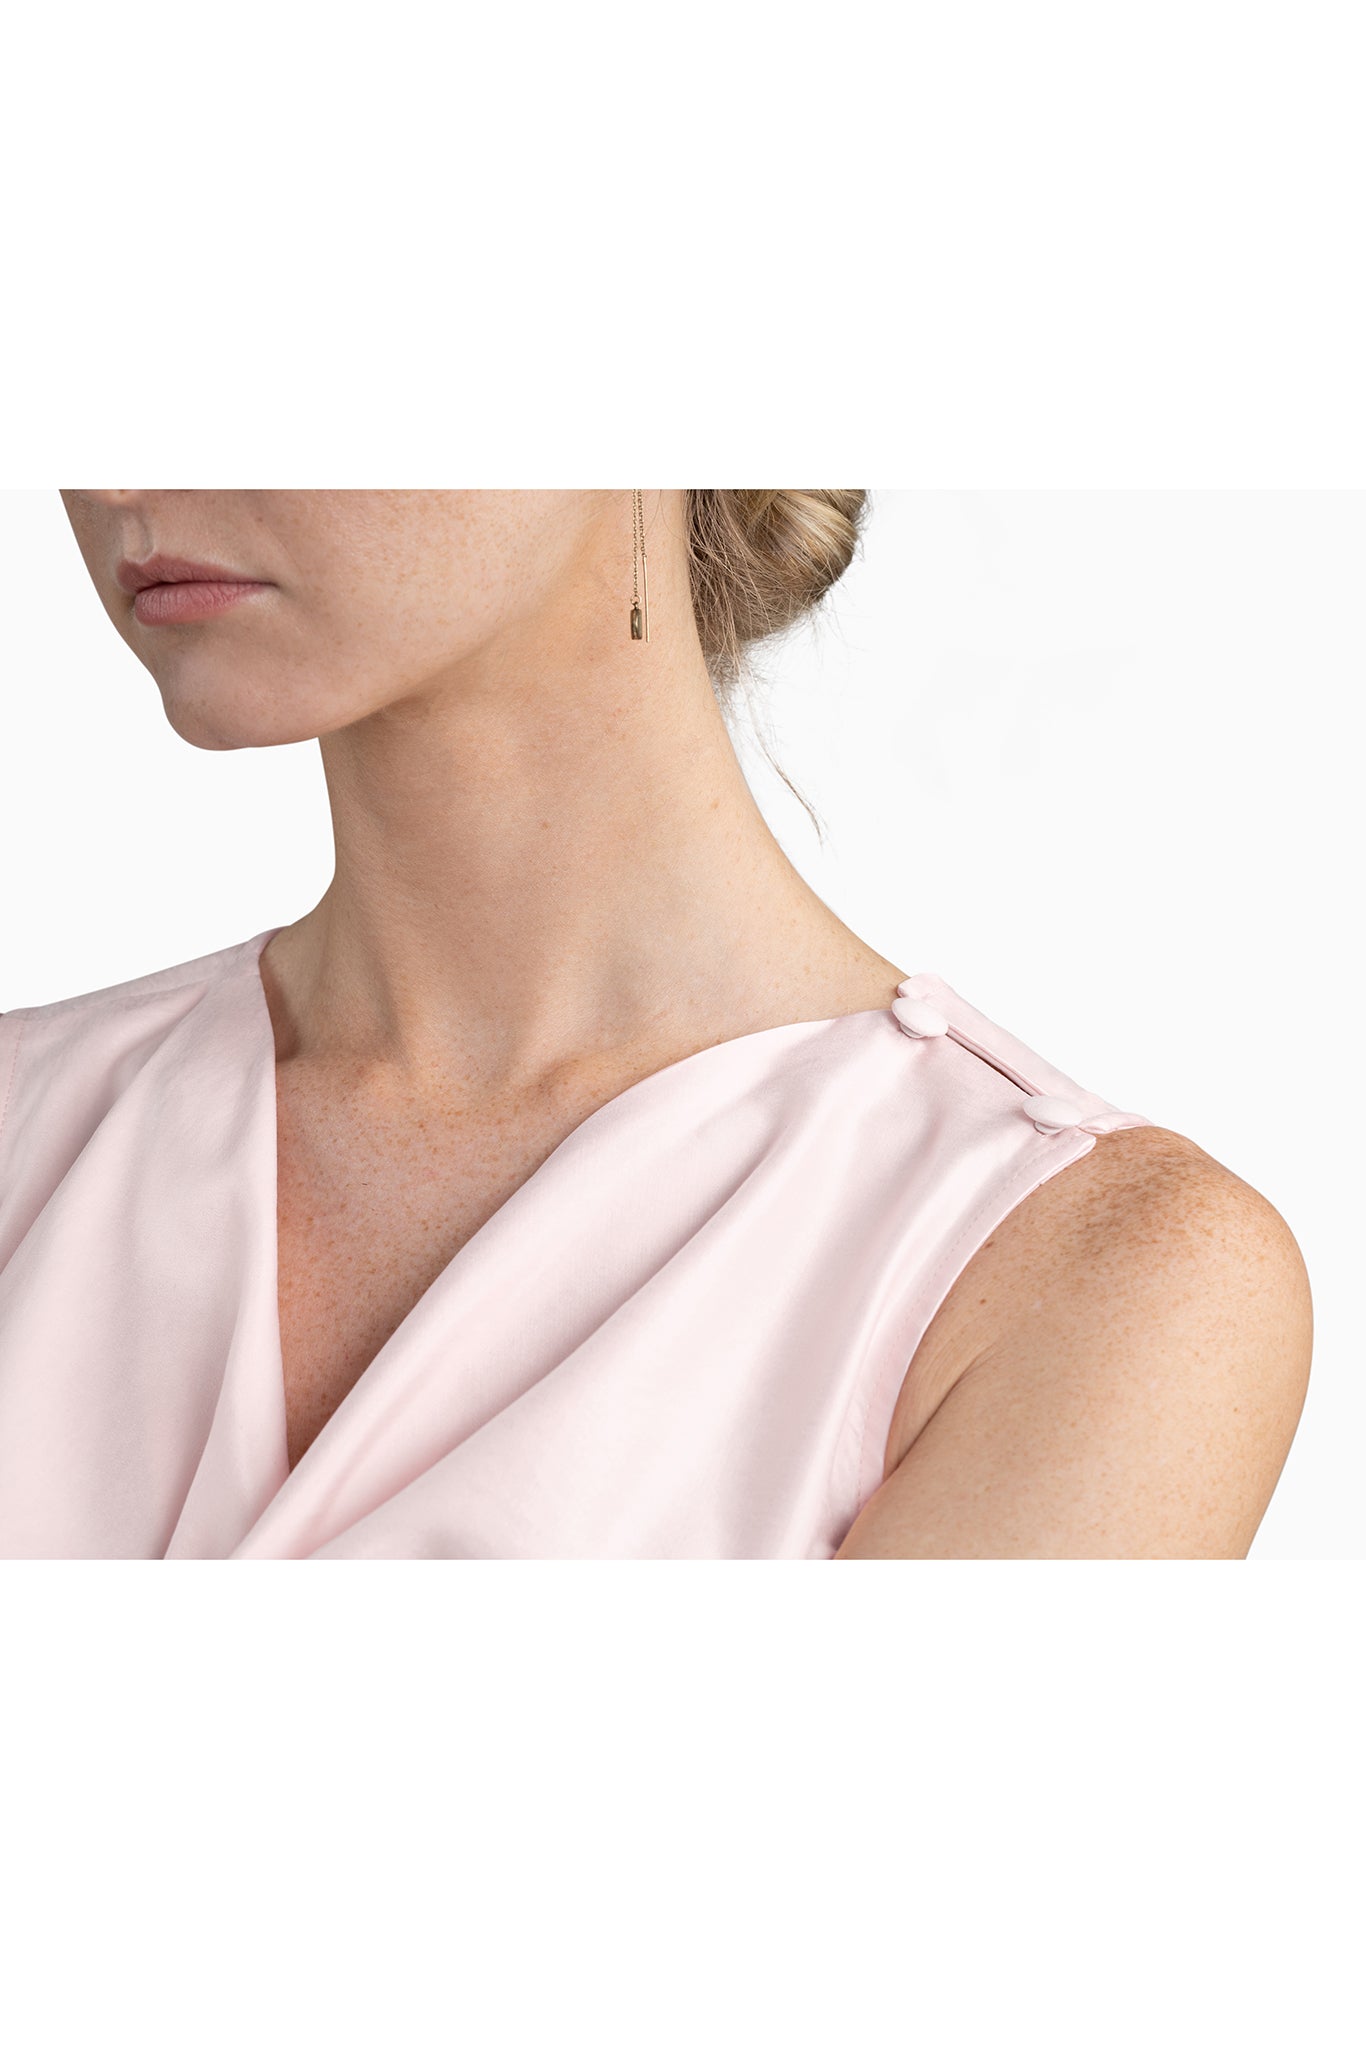 Women's sleeveless top with effortless drape and soft luxurious feel. Its unique Cupro-Cotton composition ensures perfect for all-day wear.